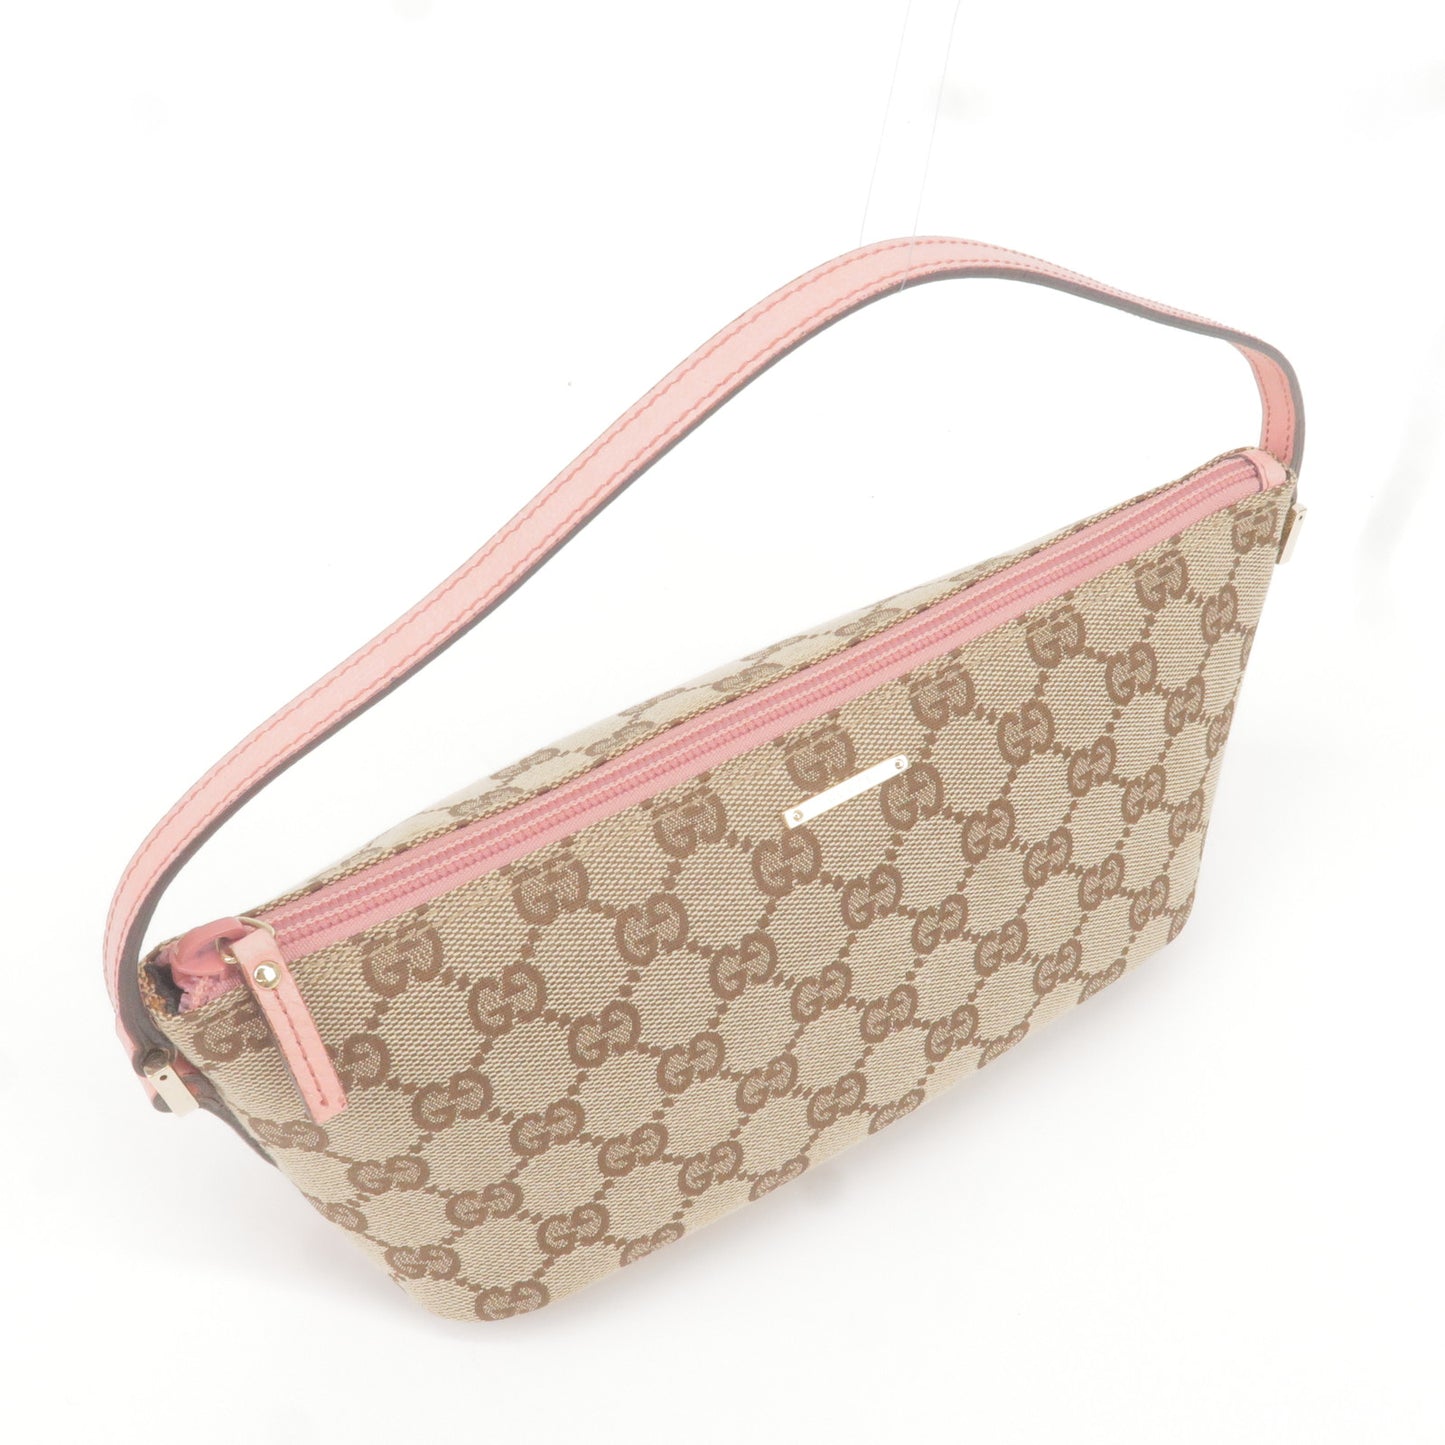 GUCCI GG Canvas Leather Boat Bag Hand Bag Beige Pink 07198